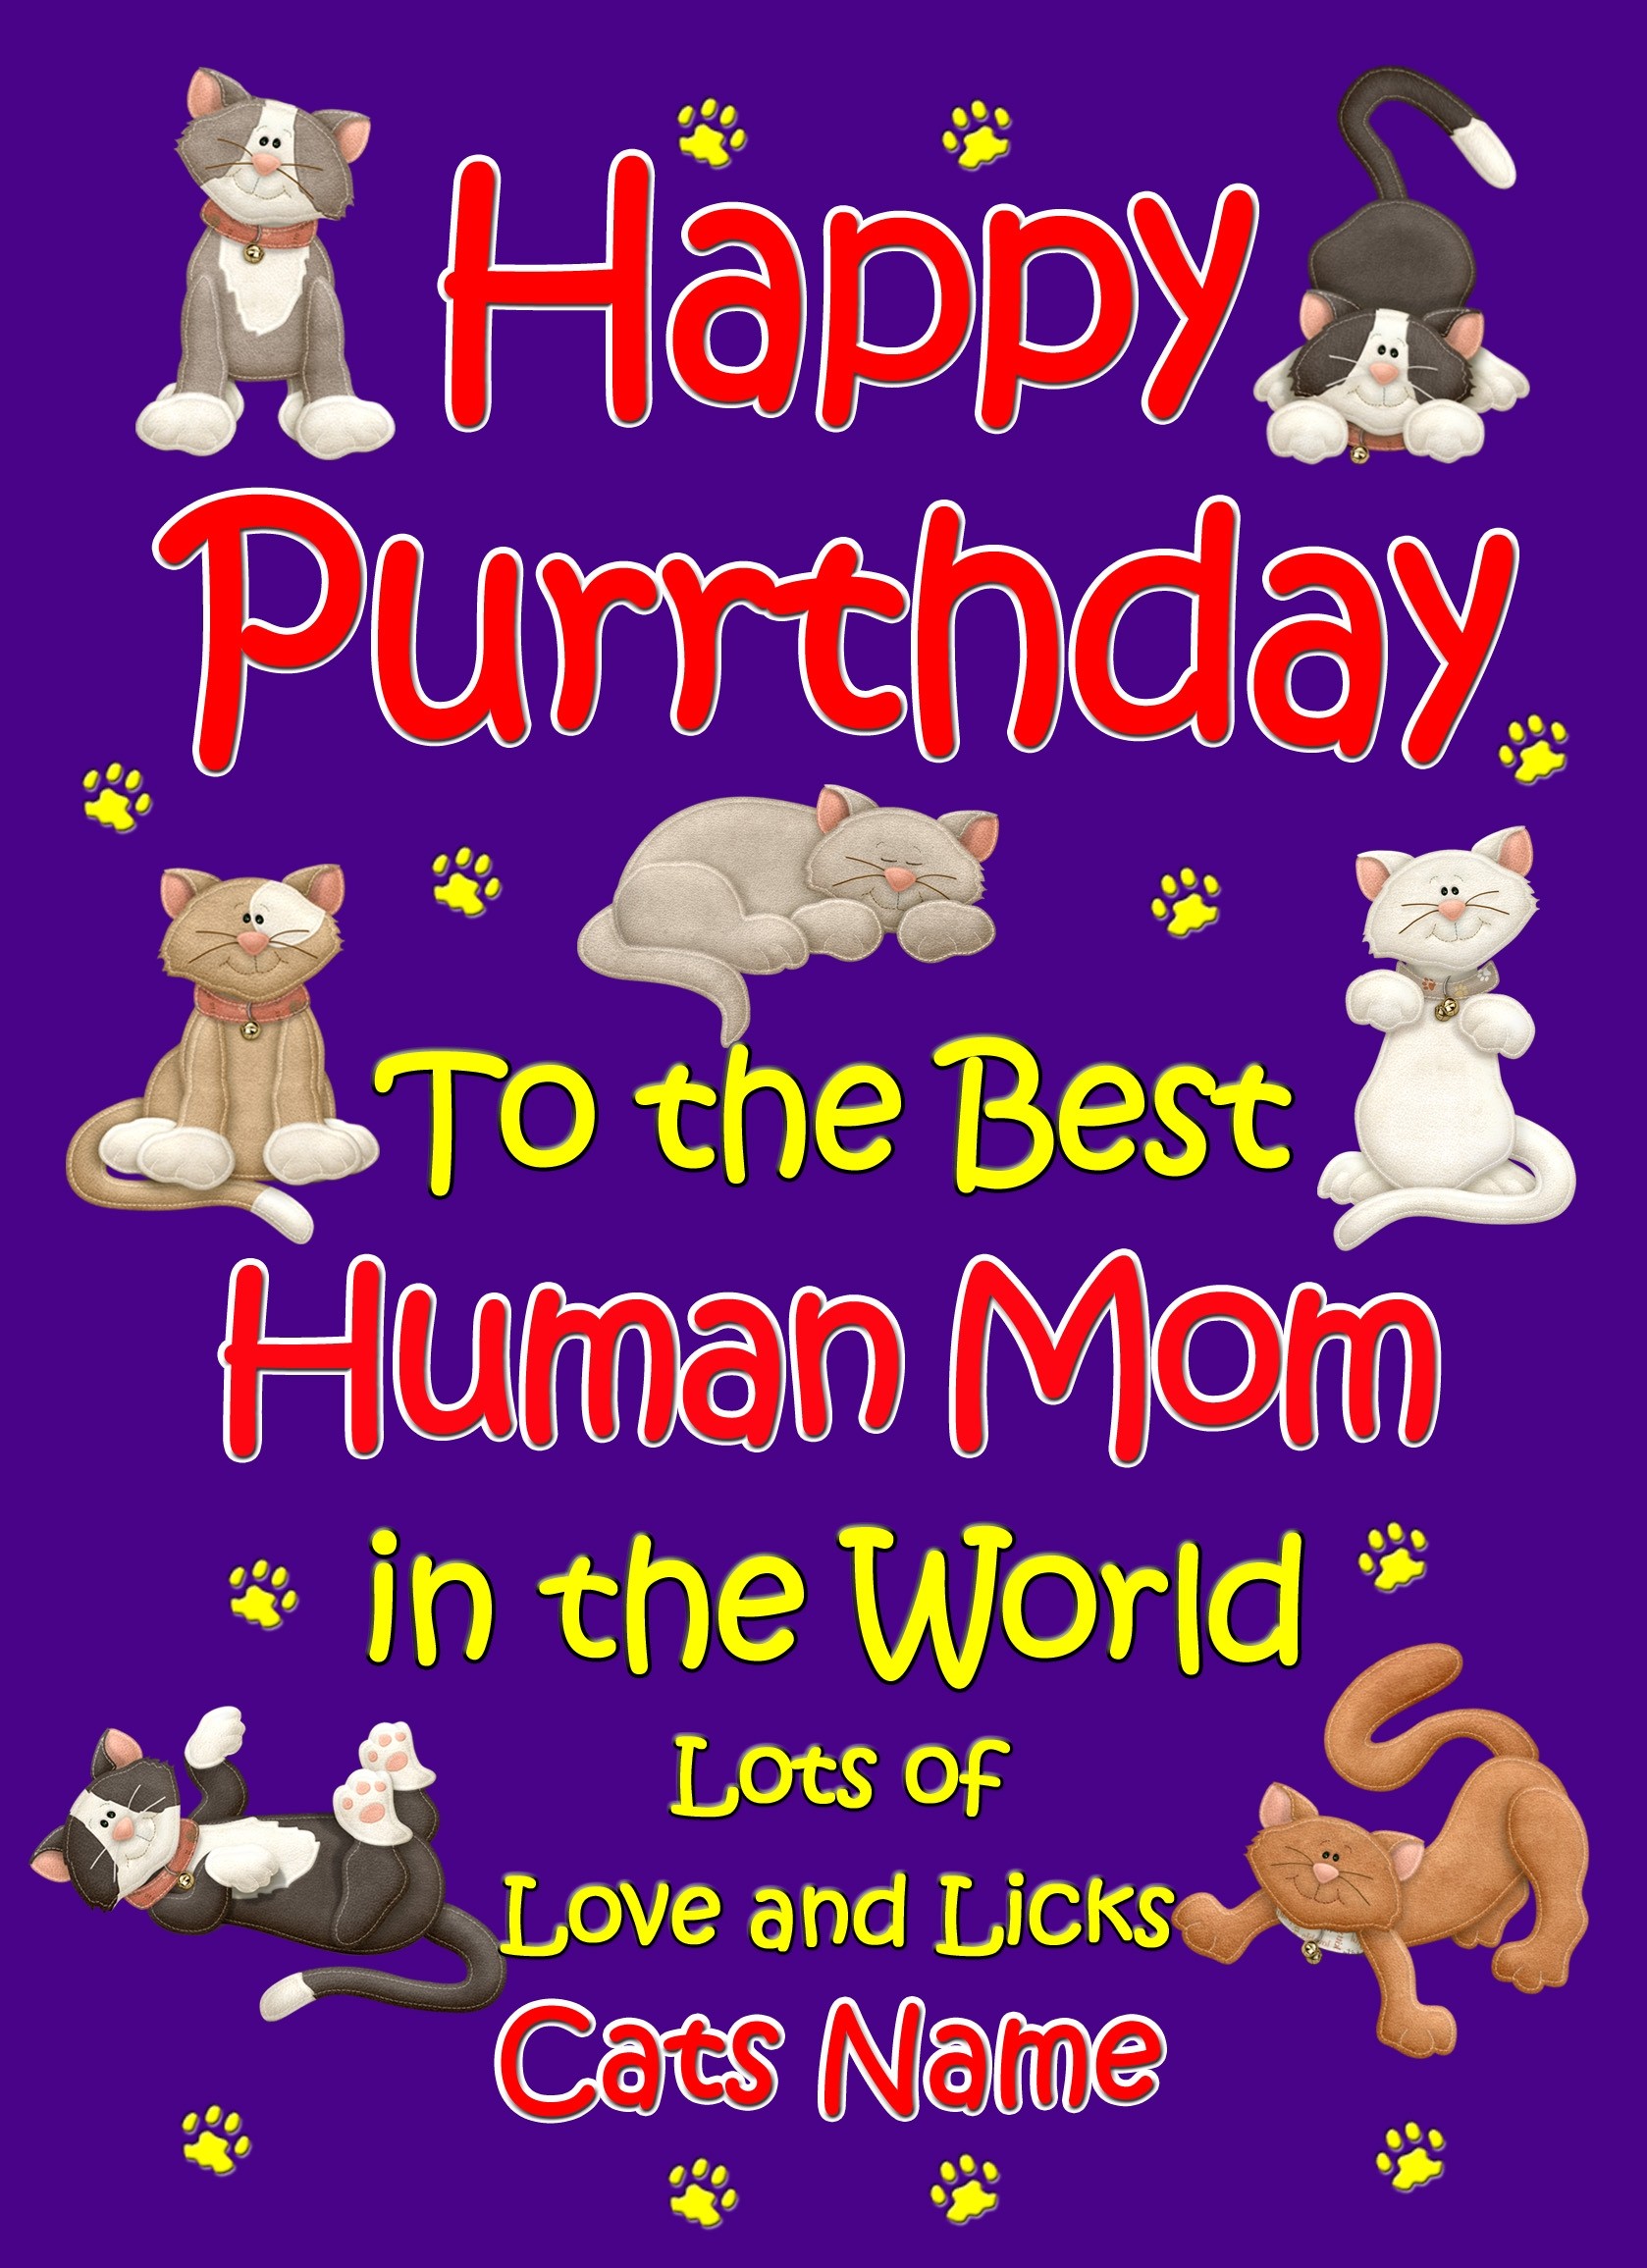 Personalised From The Cat Birthday Card (Purple, Human Mom, Happy Purrthday)